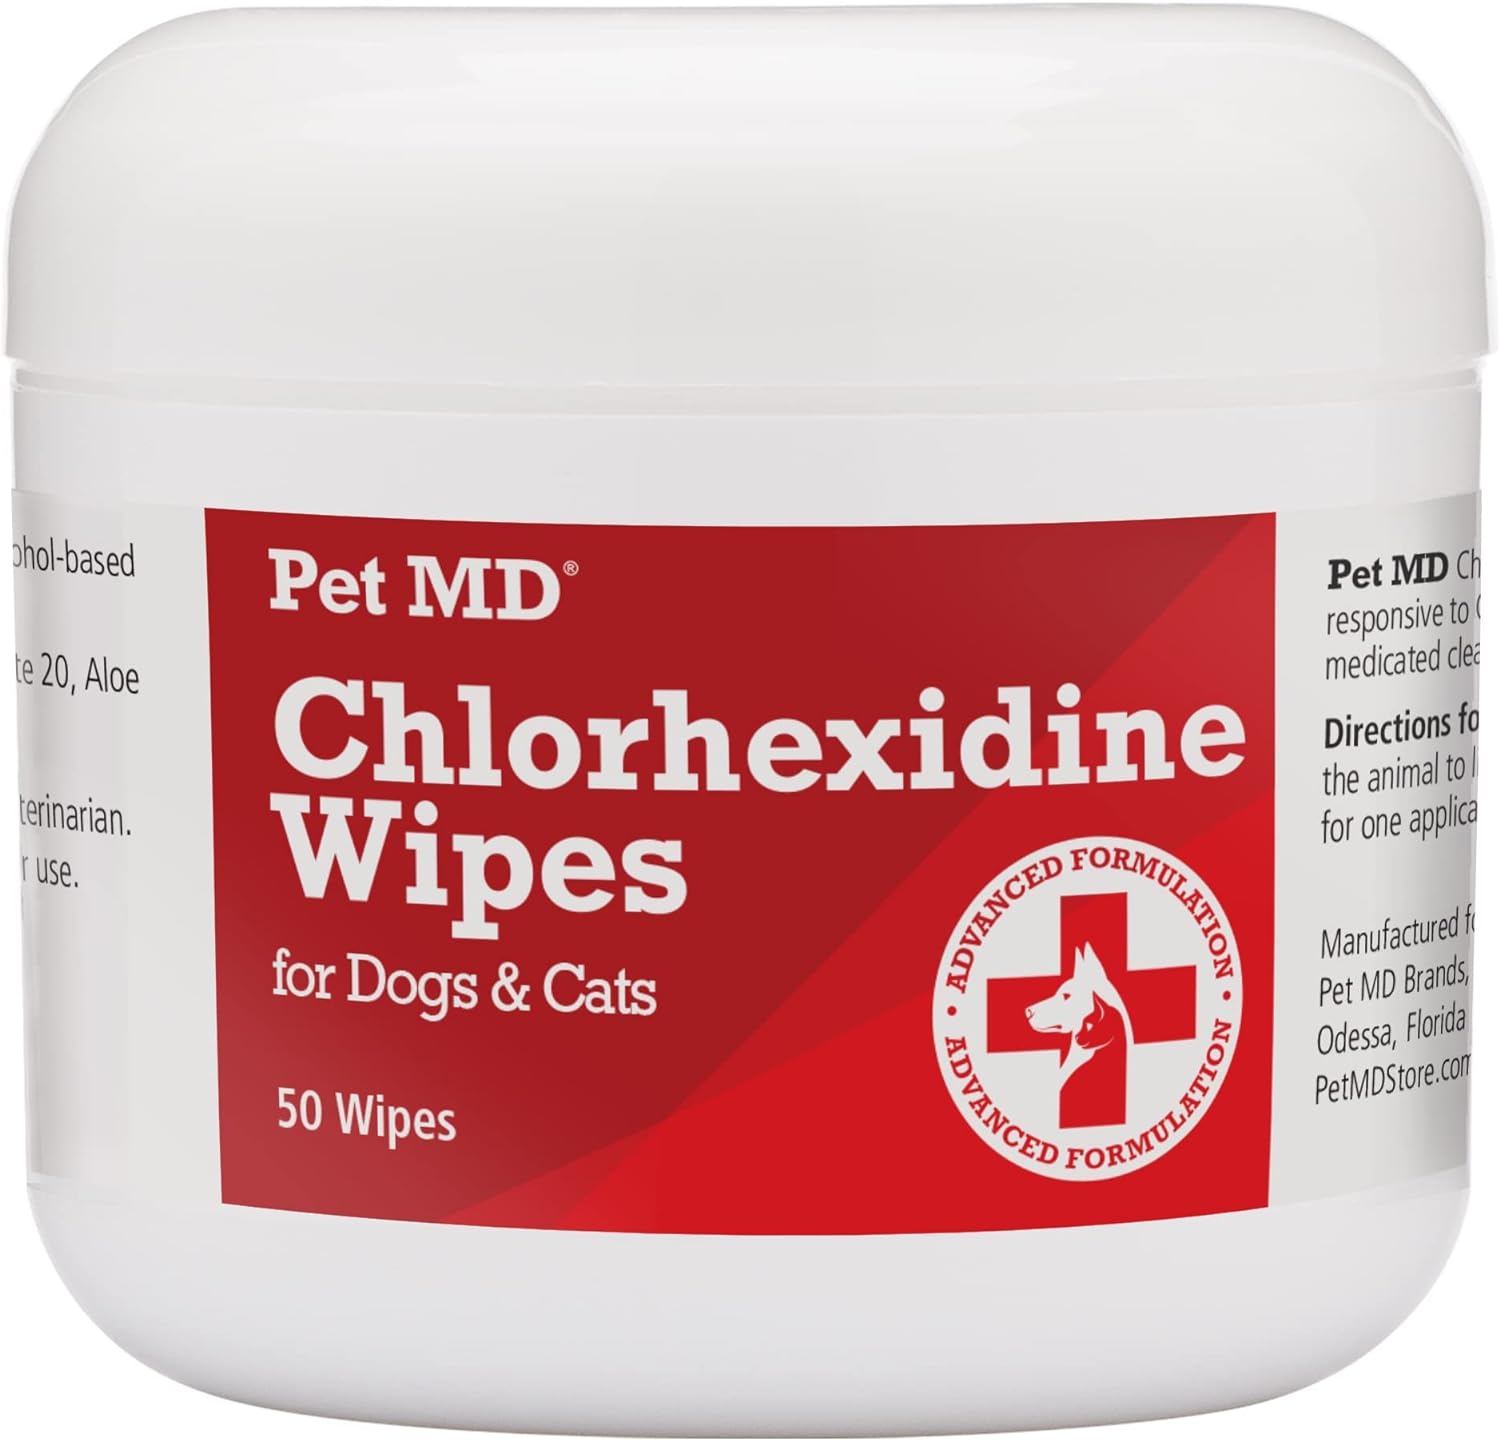 Pet MD Topical Wipes for Cleansing - with Aloe for Cats and Dogs - 50 Count